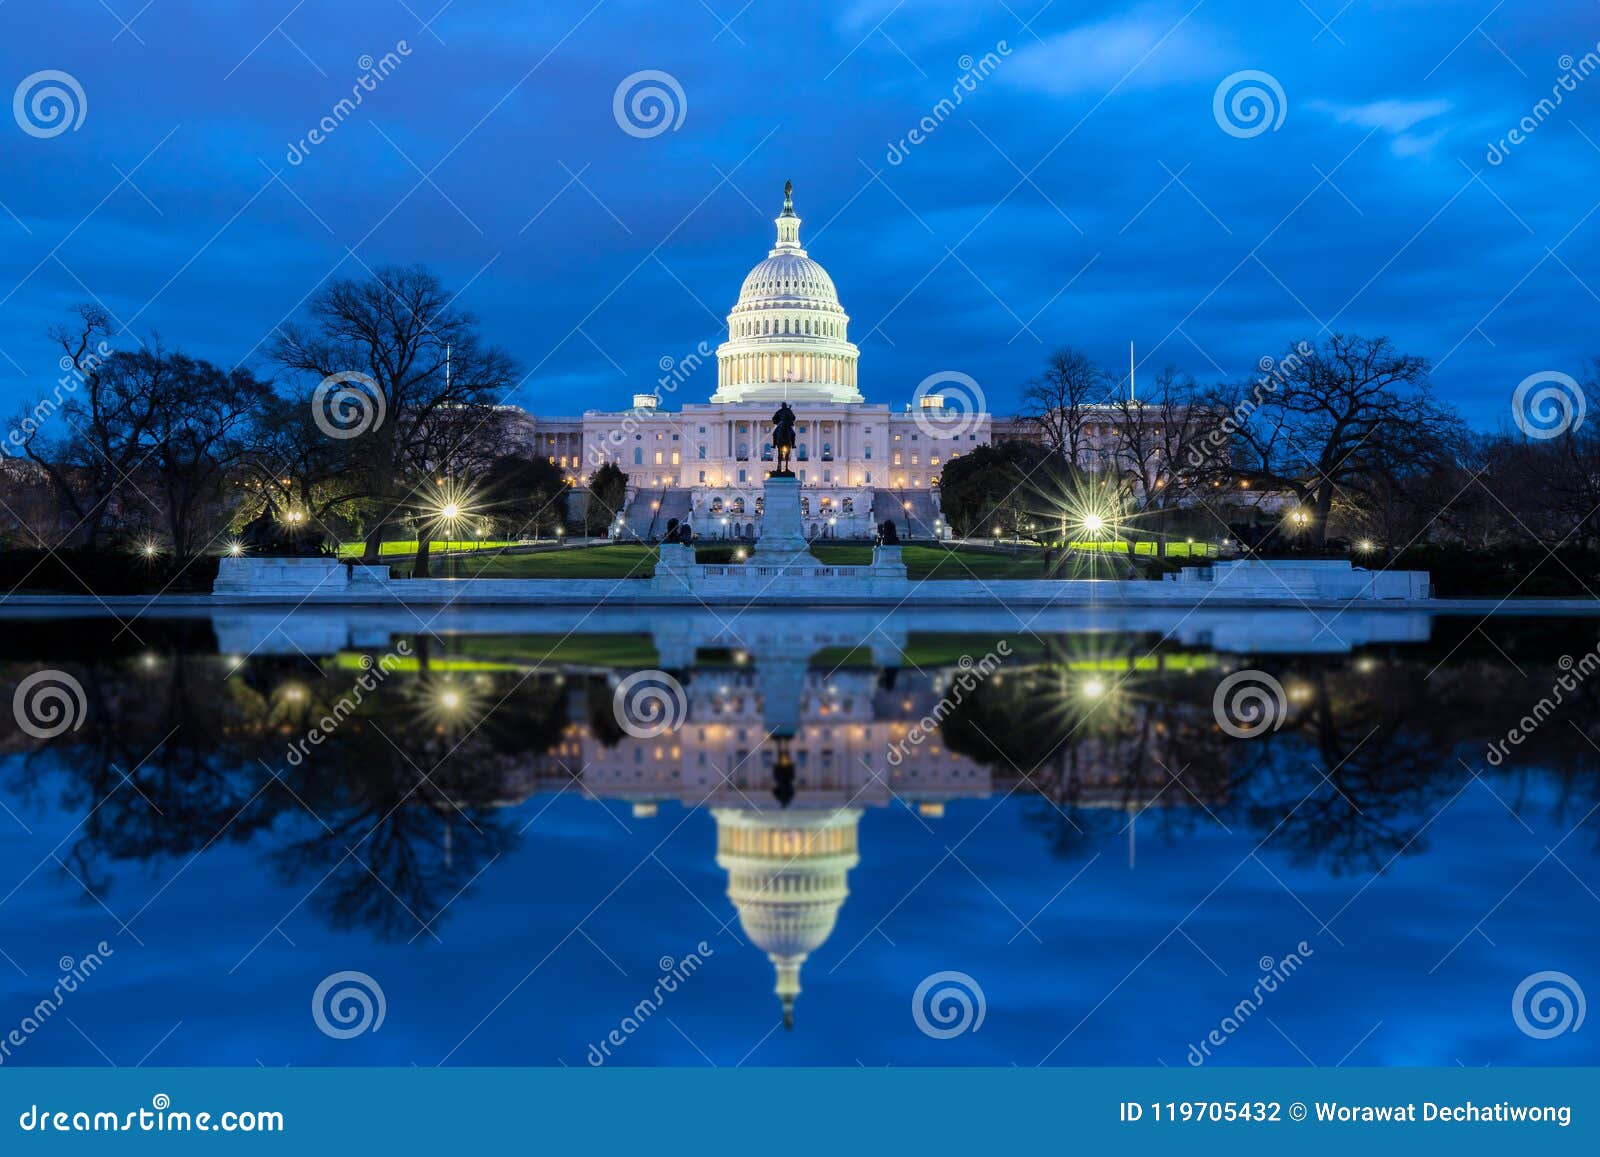 the united states capitol with reflection at night, washington dc